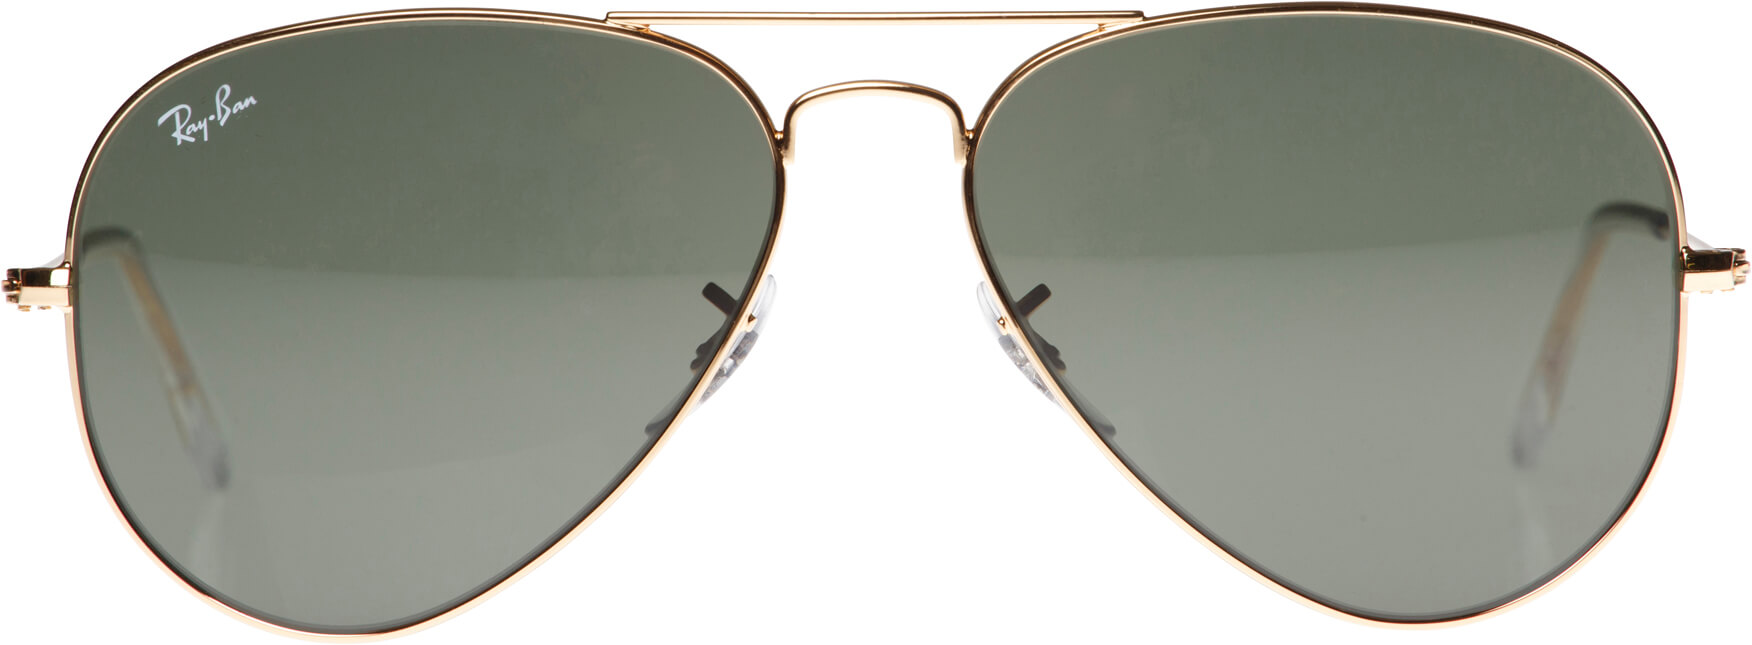 Ray-Ban Aviator 3025 image number null